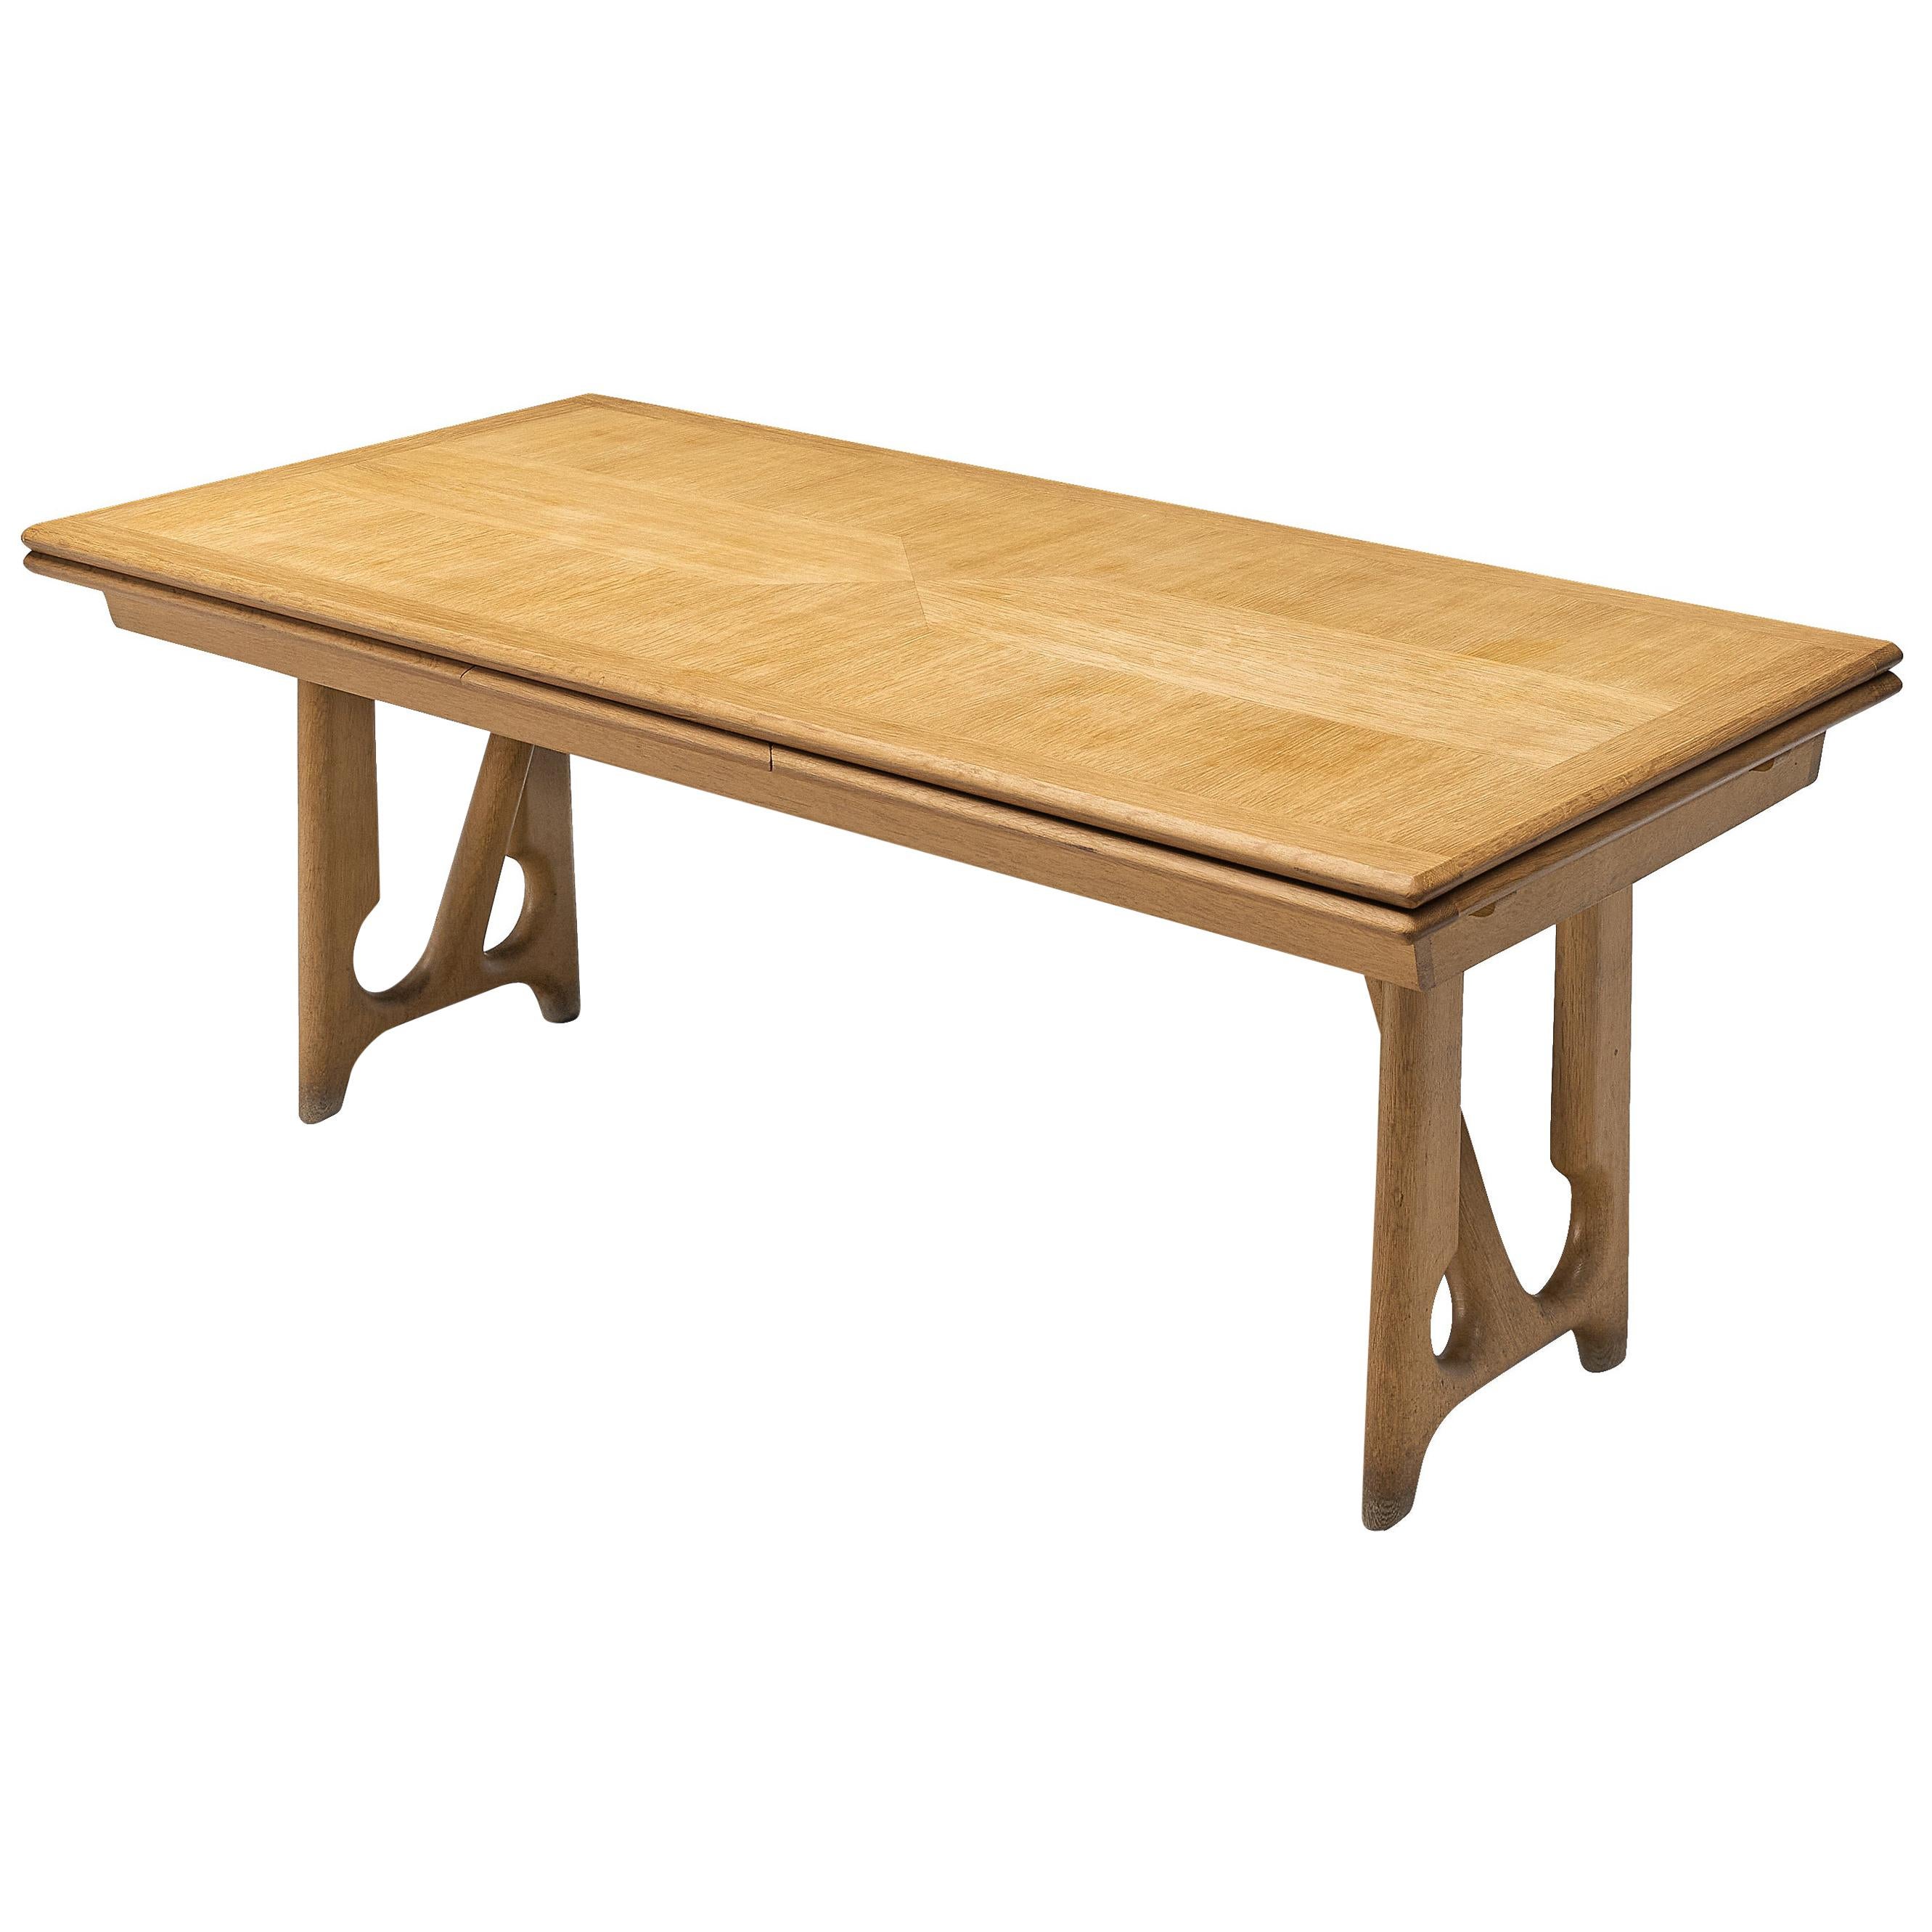 Guillerme et Chambron Extendable Dining Table in Oak